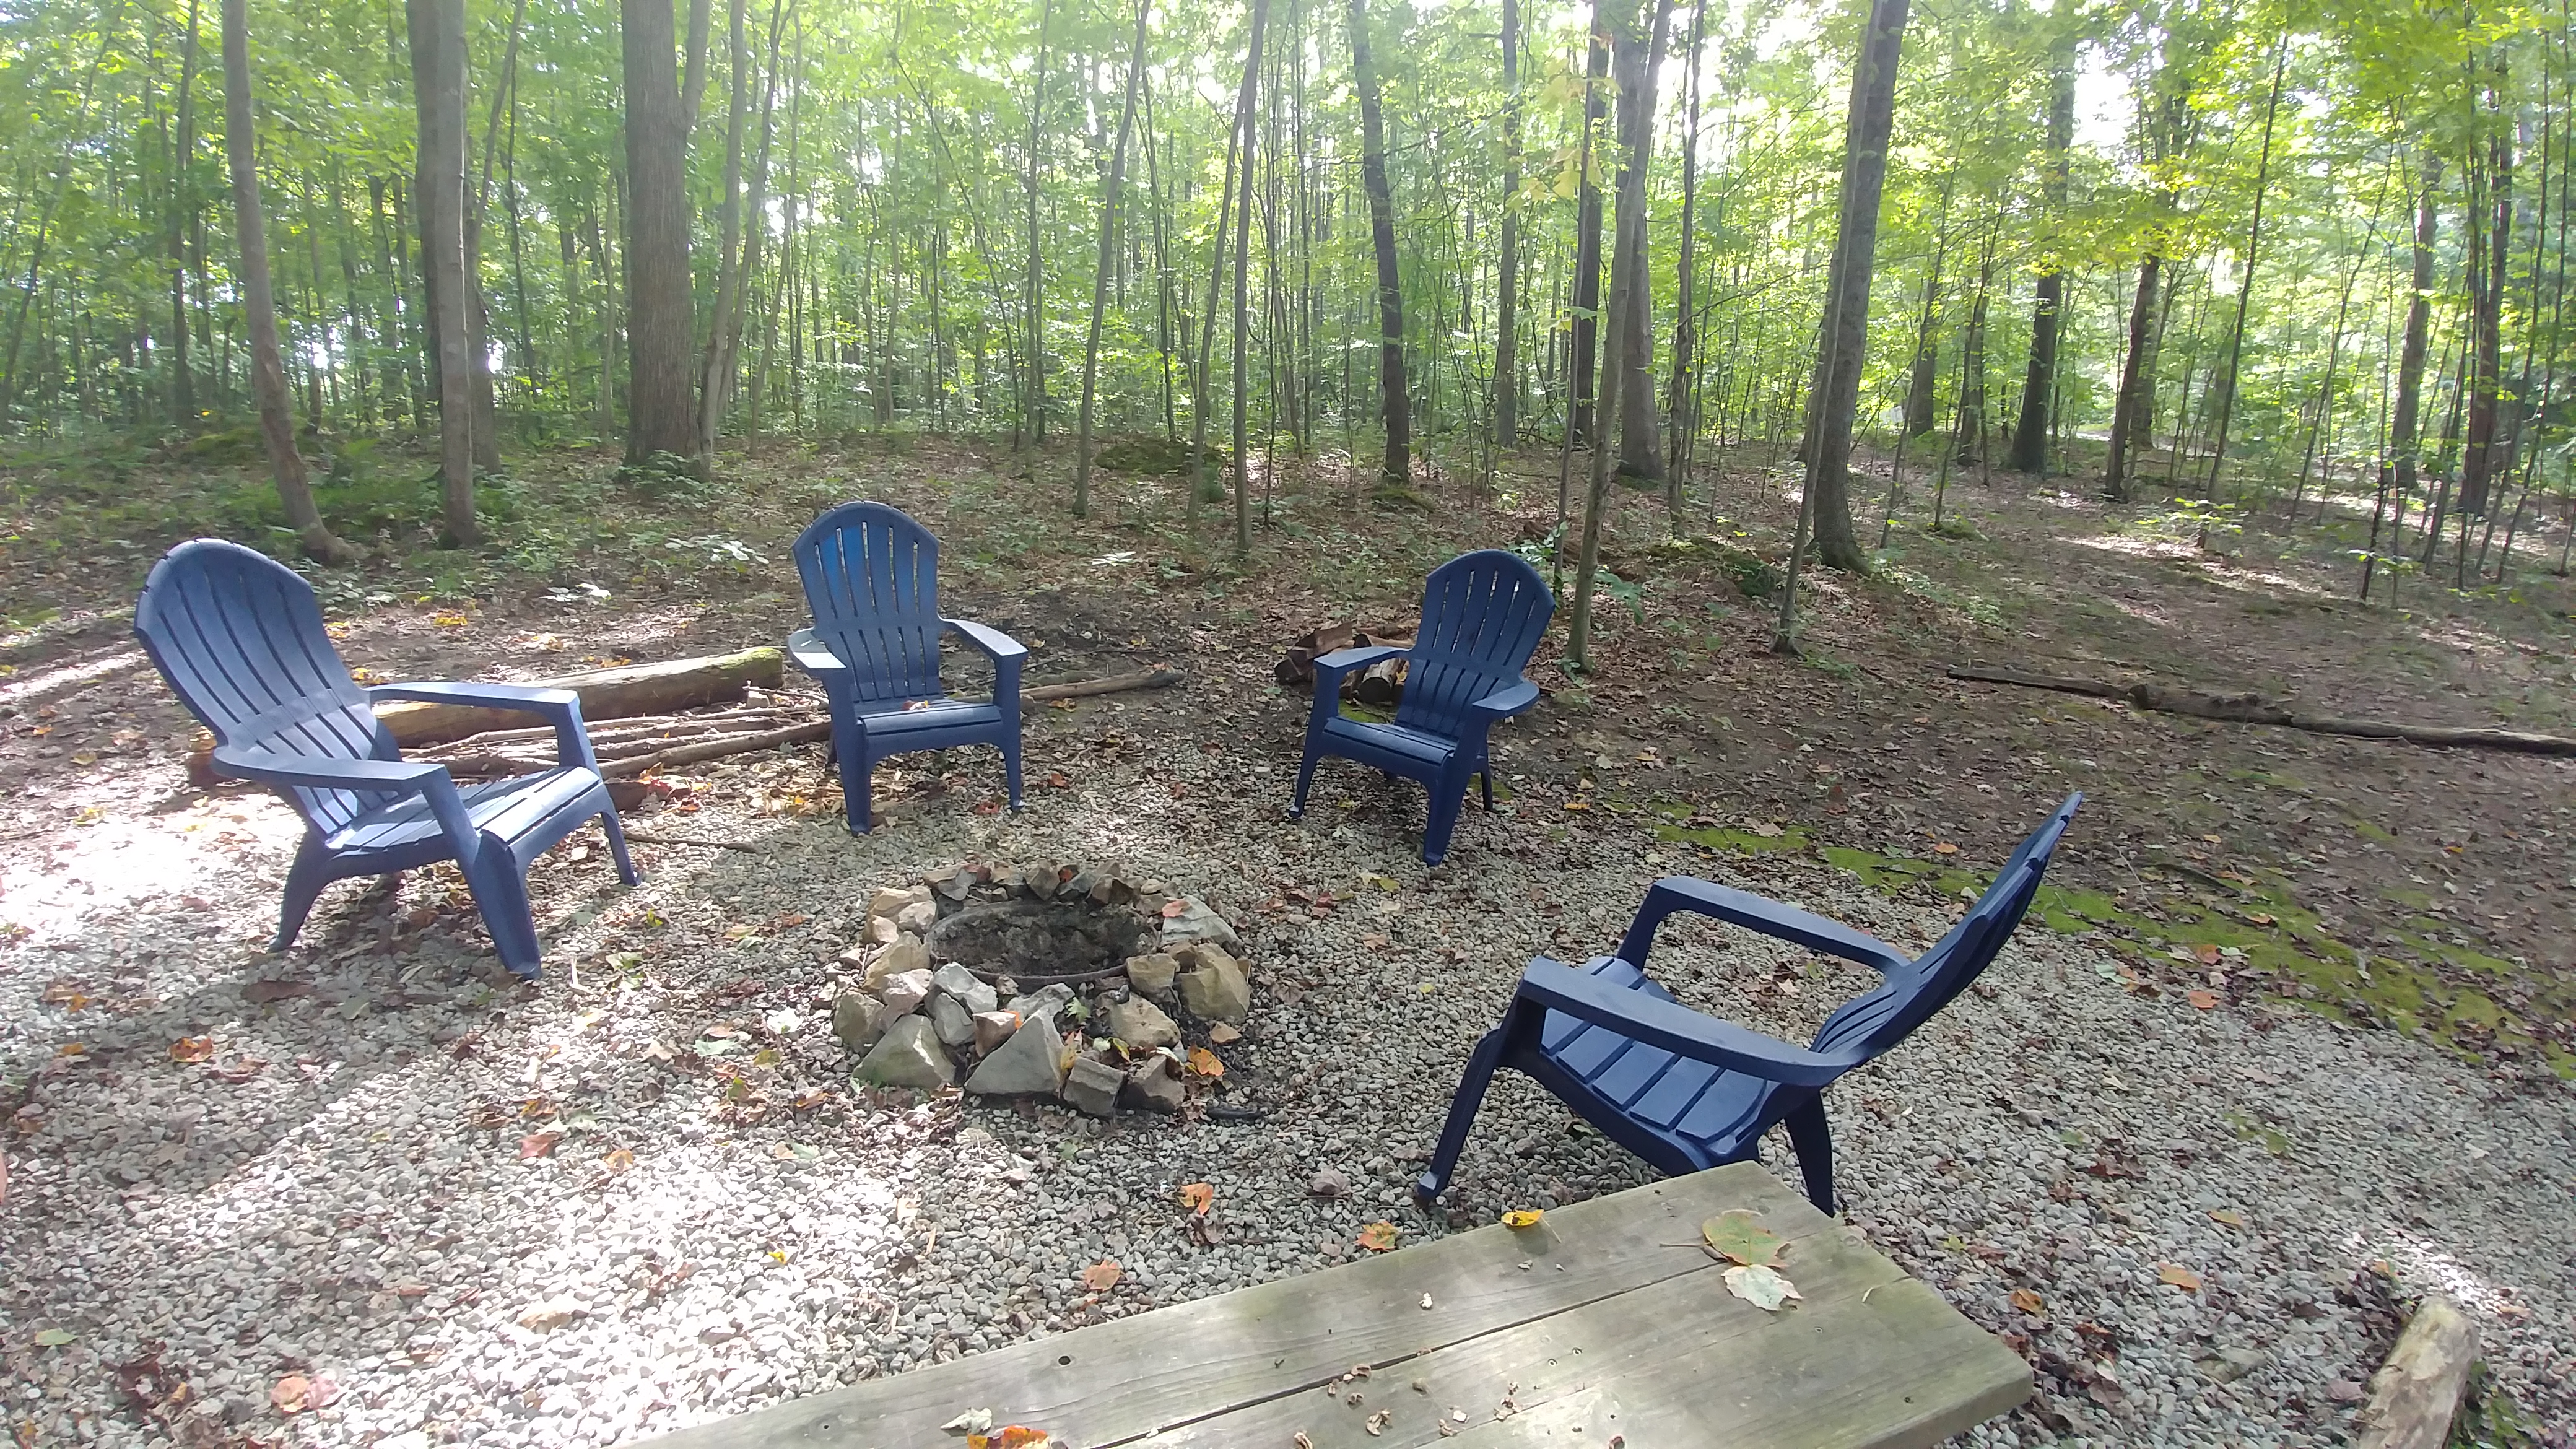 Photo 619_7571.jpg - The fire pit is located in our wooded surrounding, such a peaceful setting!